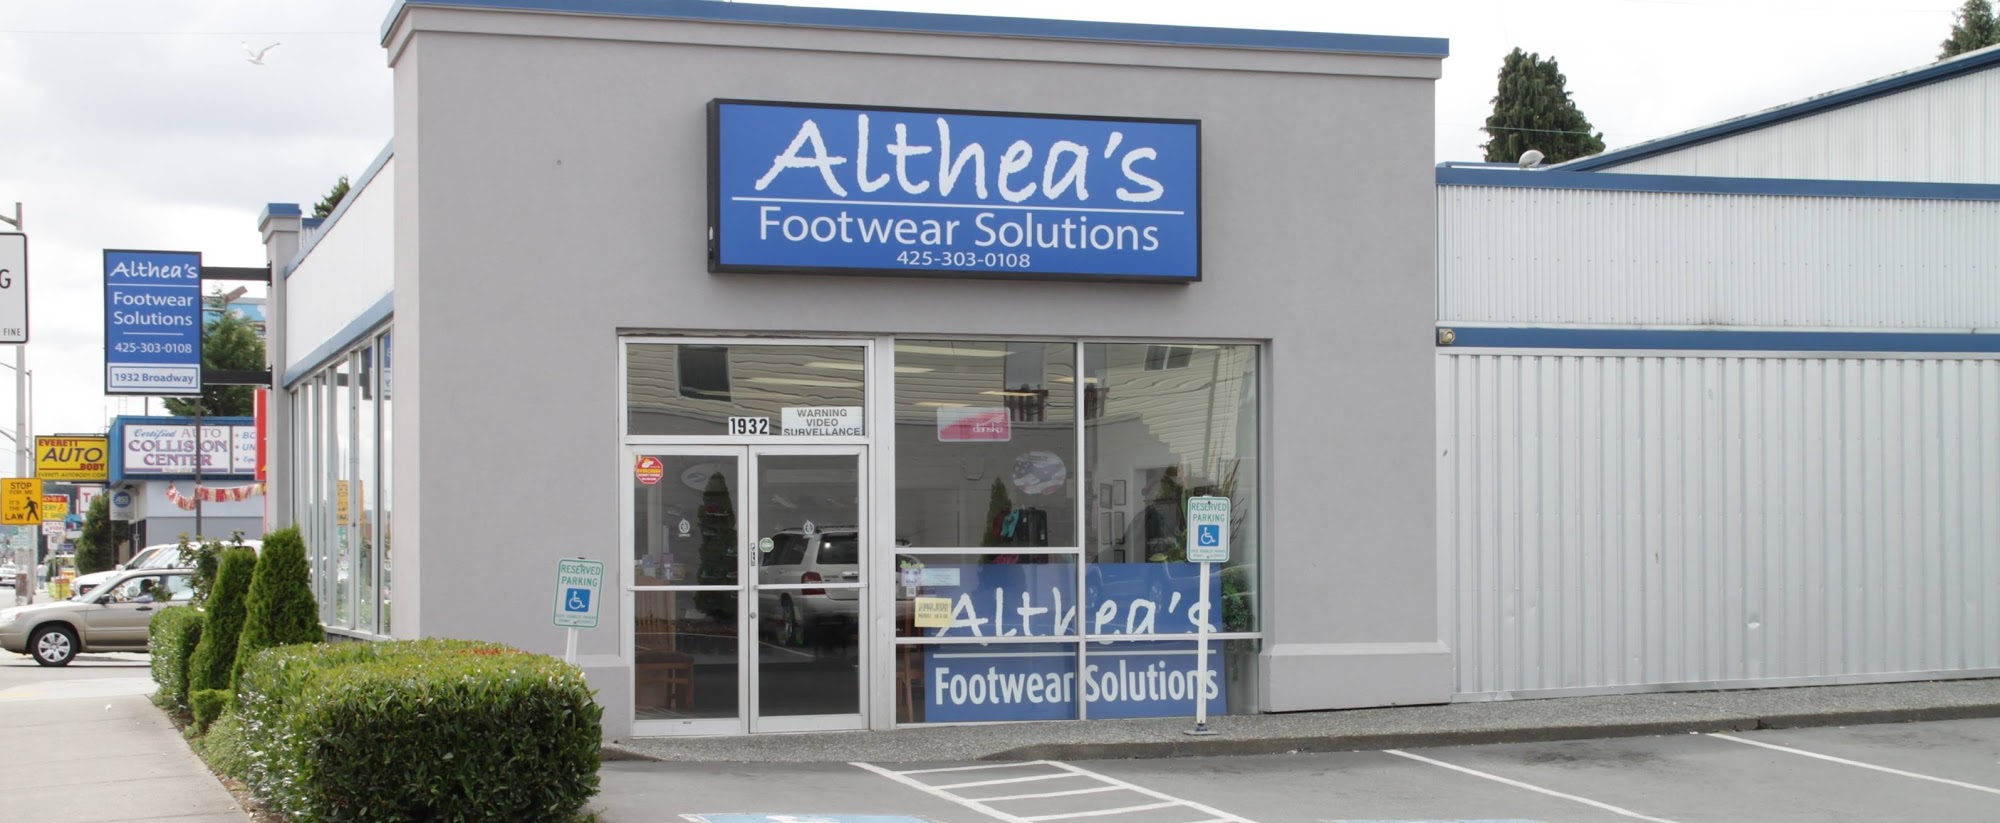 Althea's Footwear Solutions